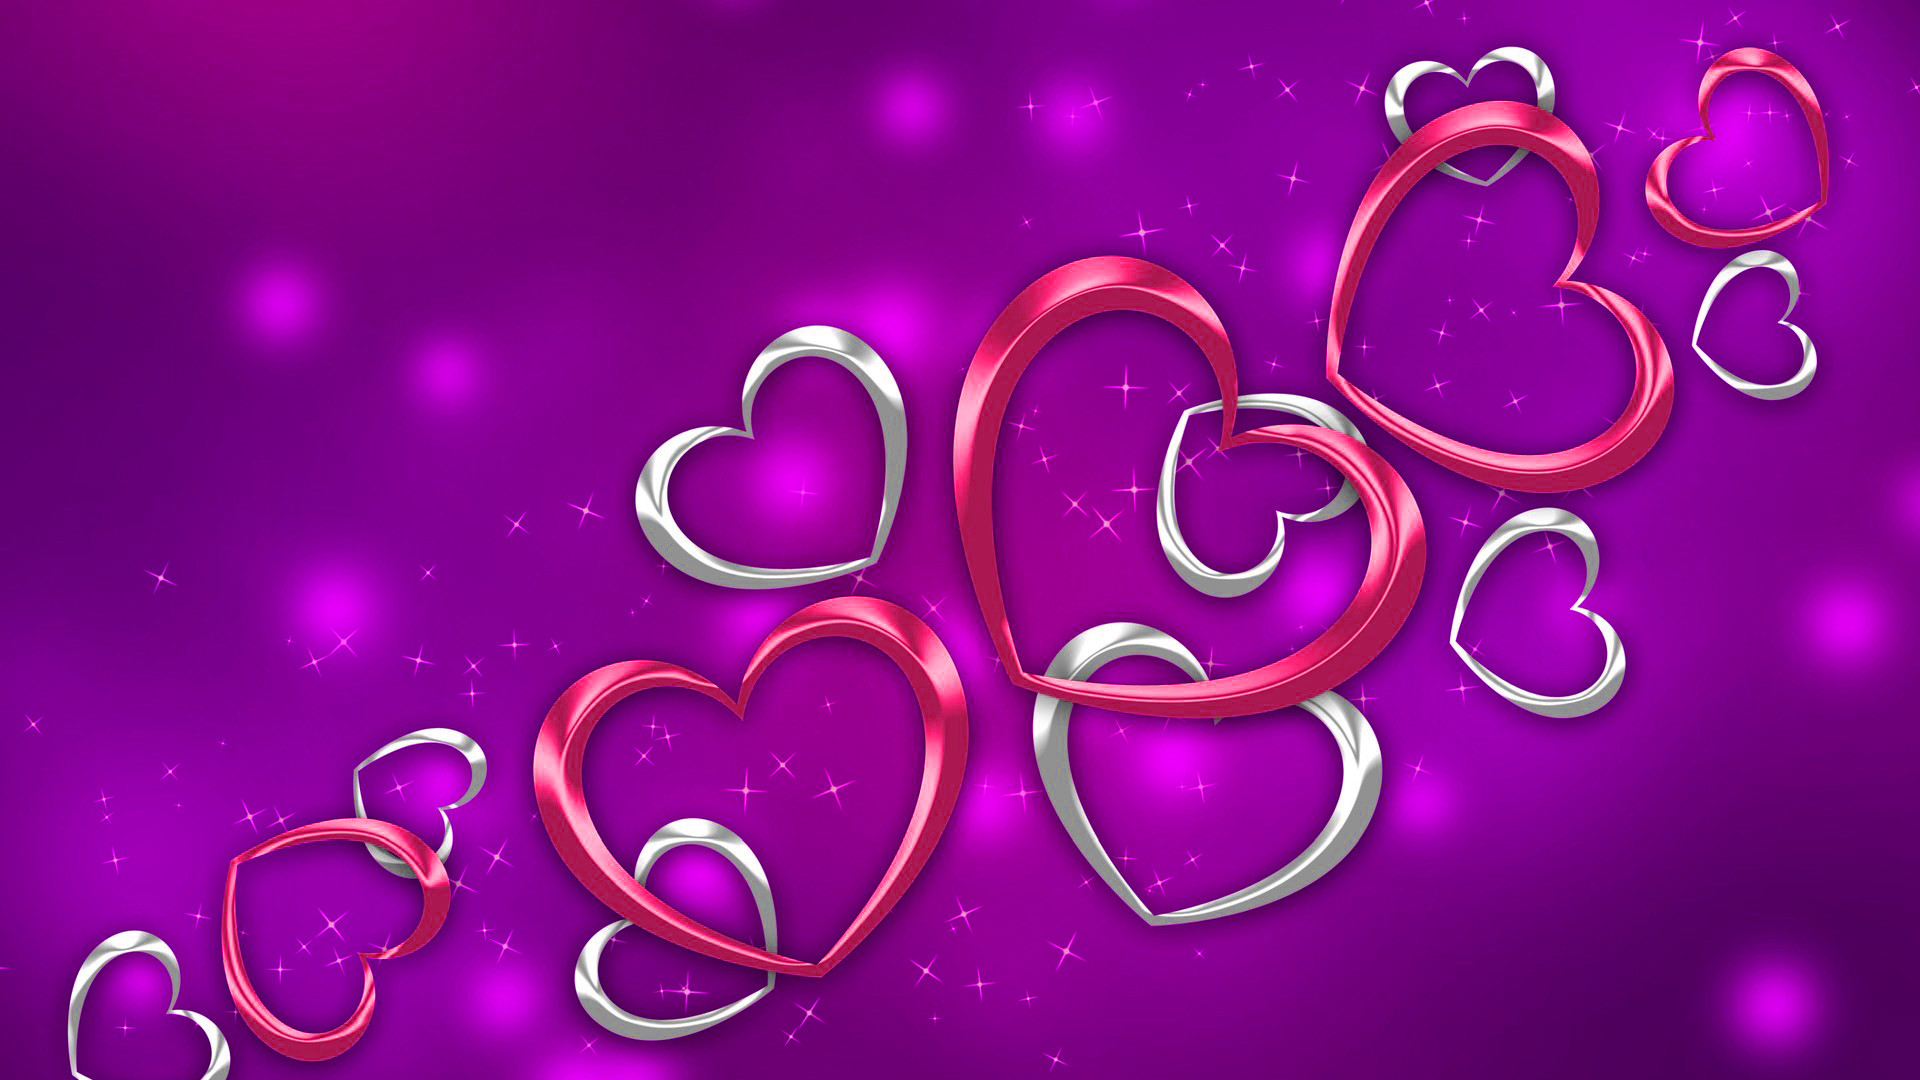 1920x1080 7 best Purple and pink .images images on Pinterest | Pink images .